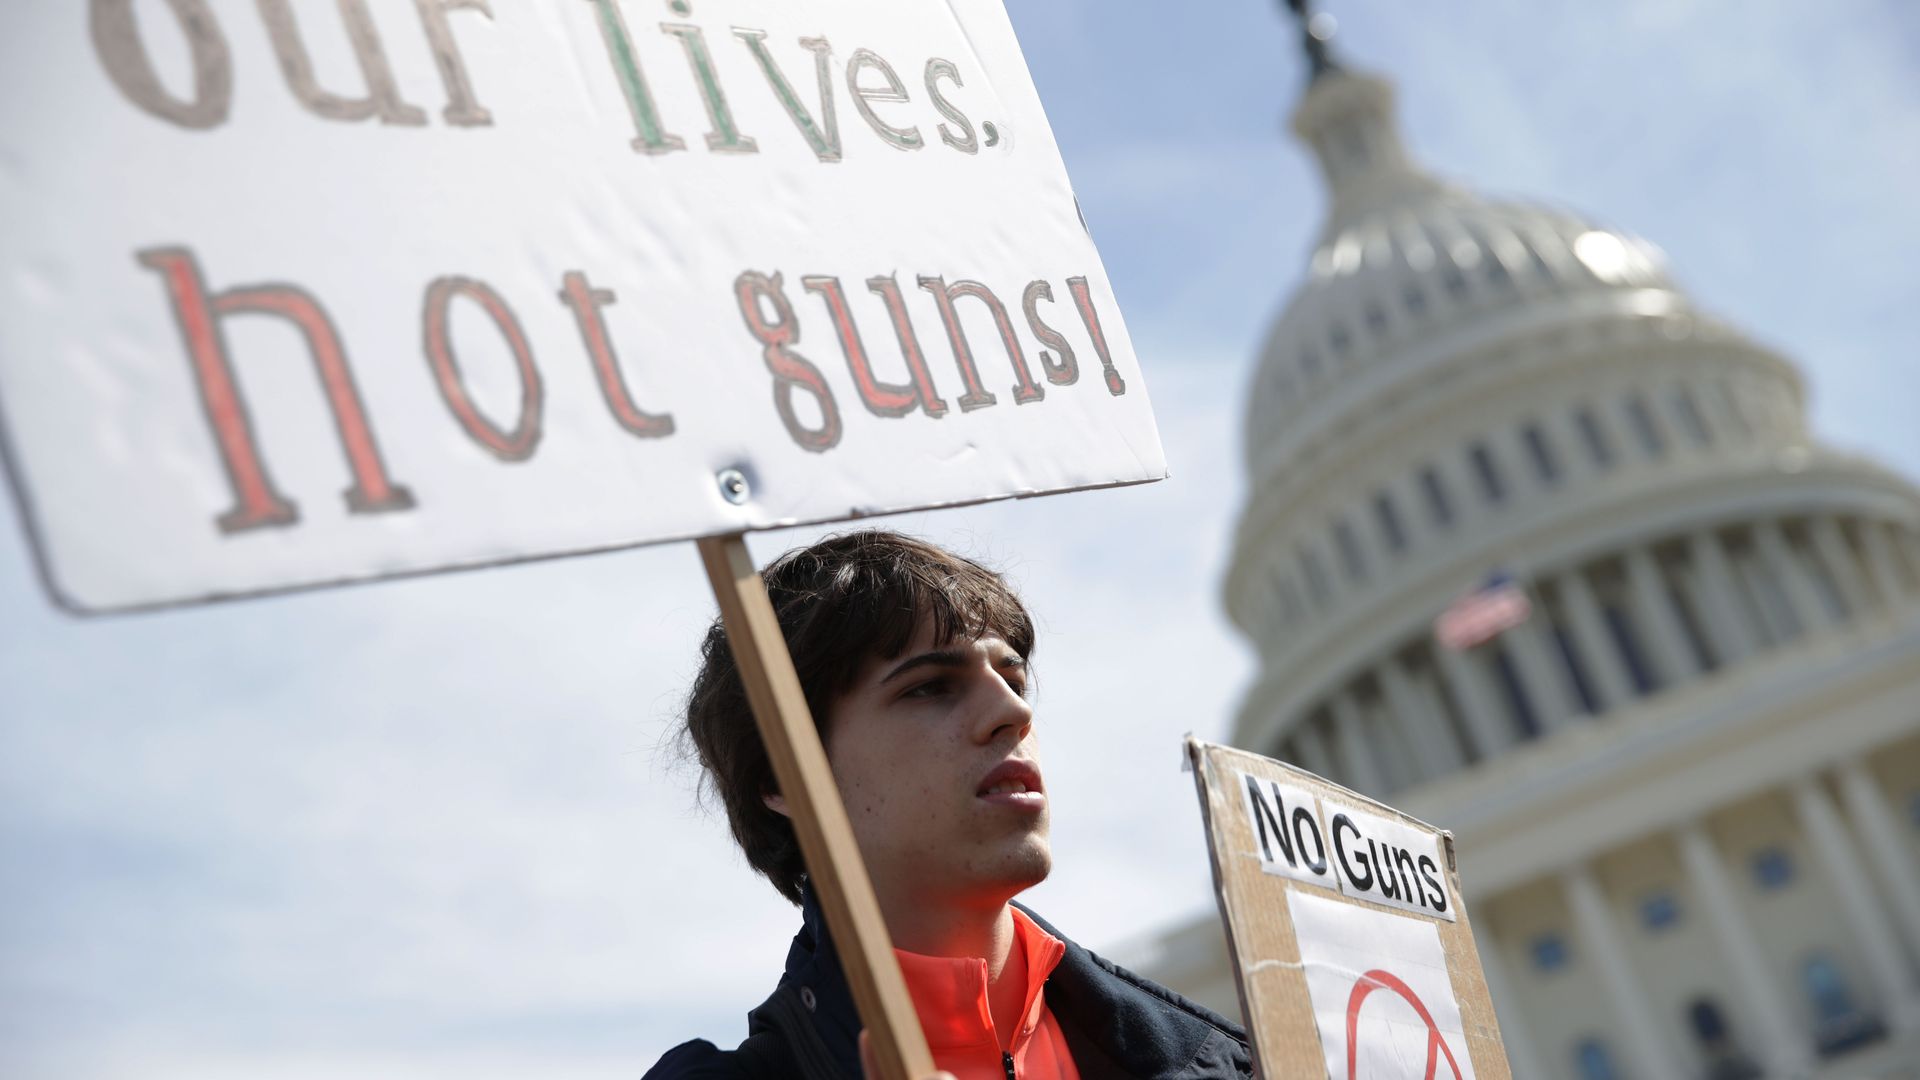 Photo of a protester in DC holding a sign that signs, "Not lives, not guns!" and another sign that shows a gun with a red X over it